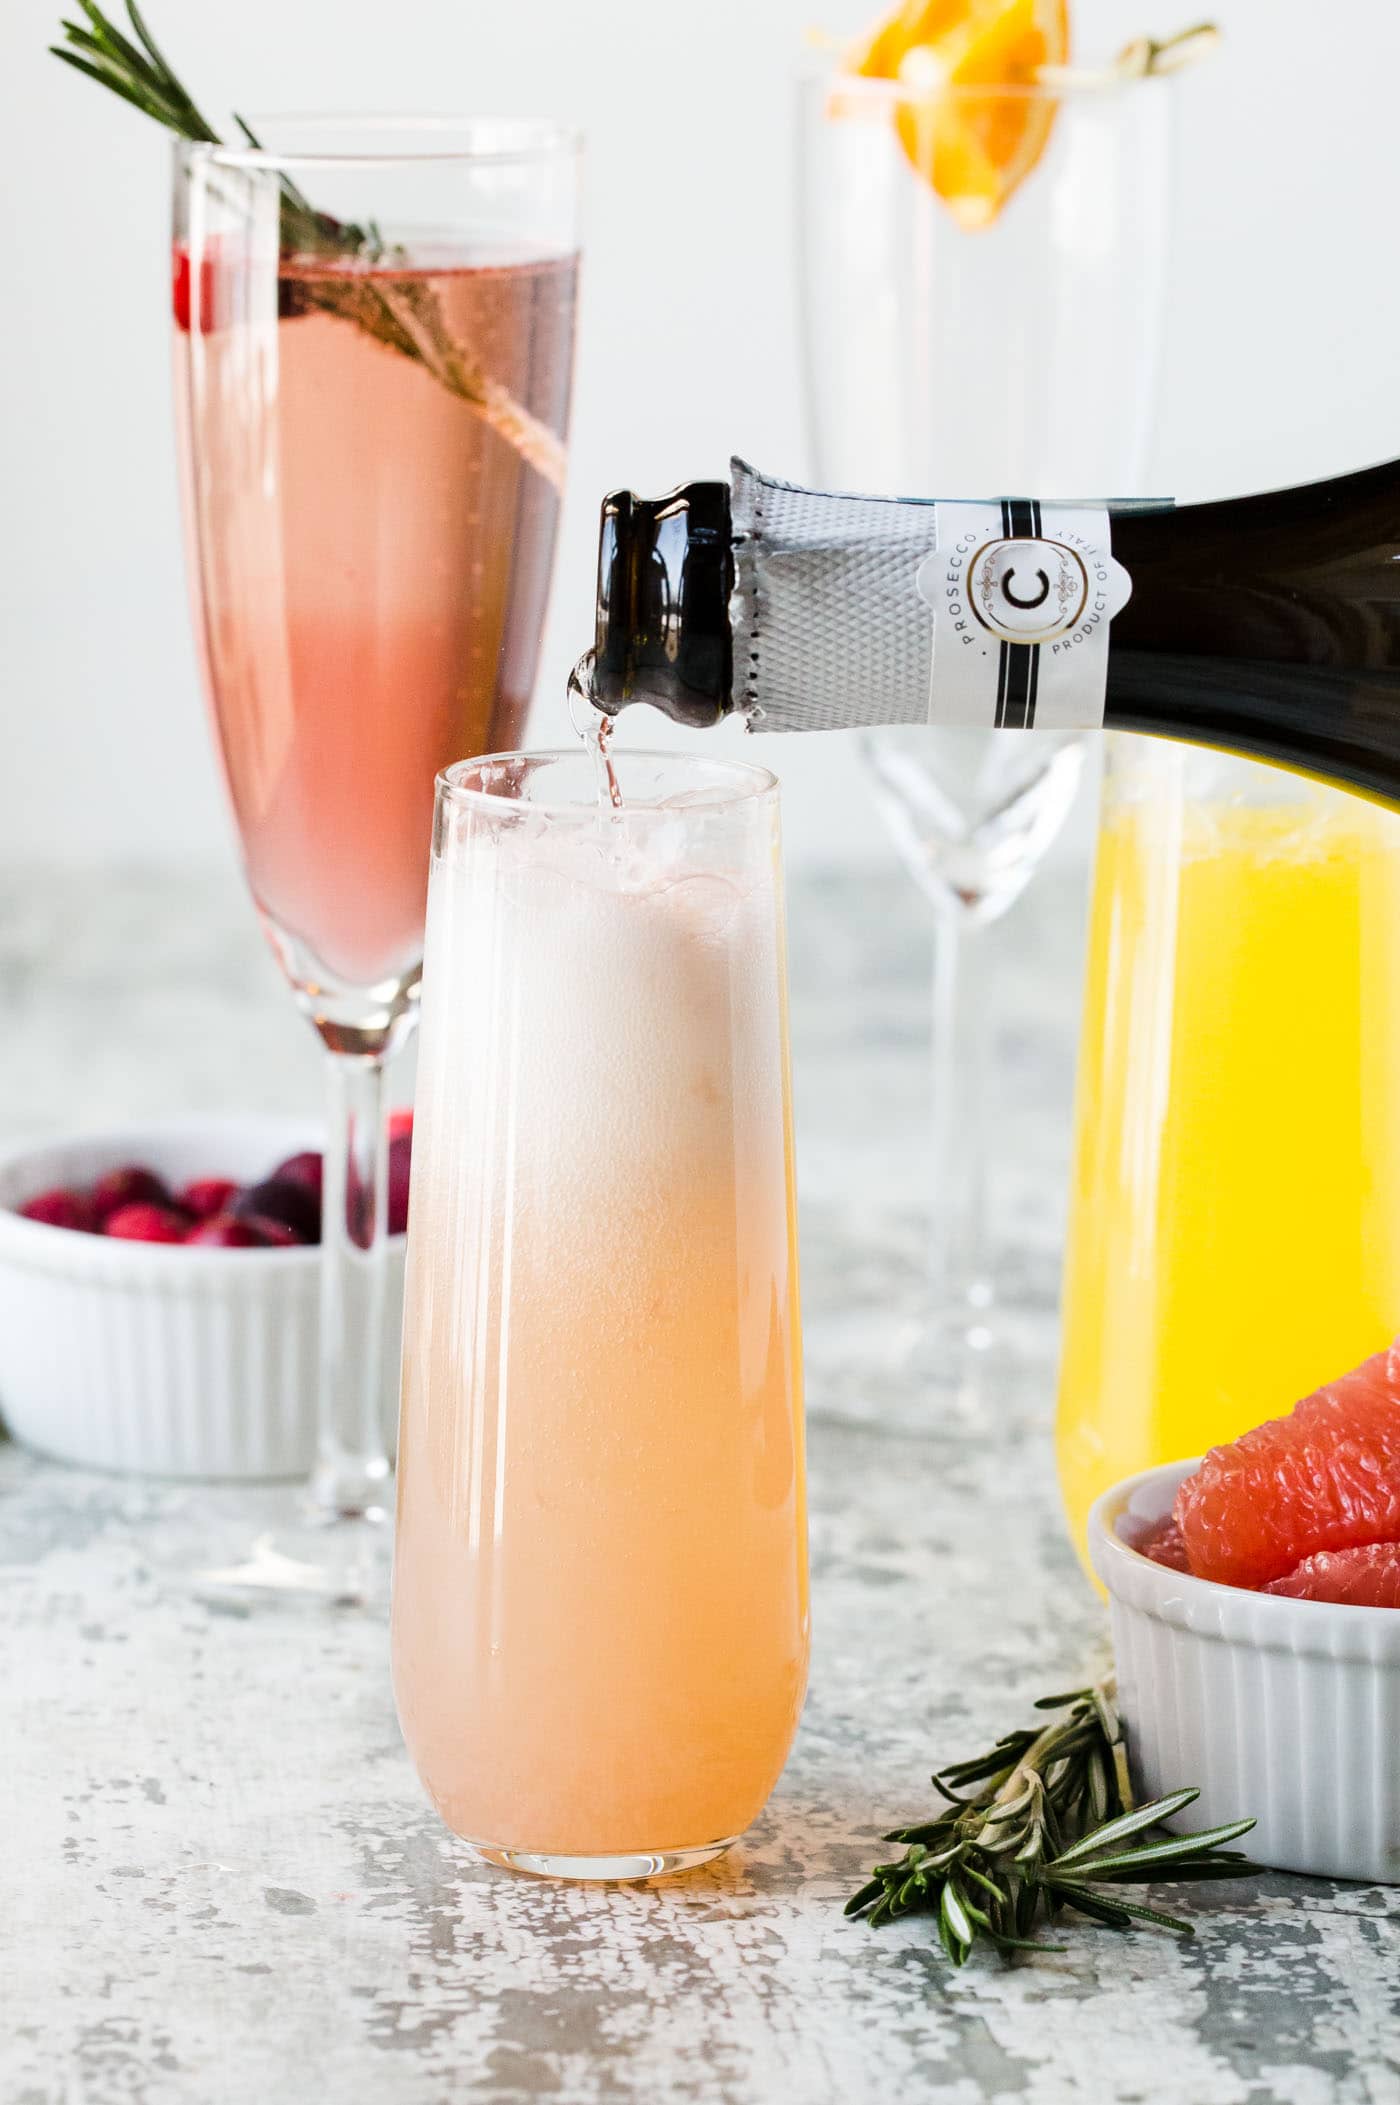 A glass of juice with Prosecco being poured into.